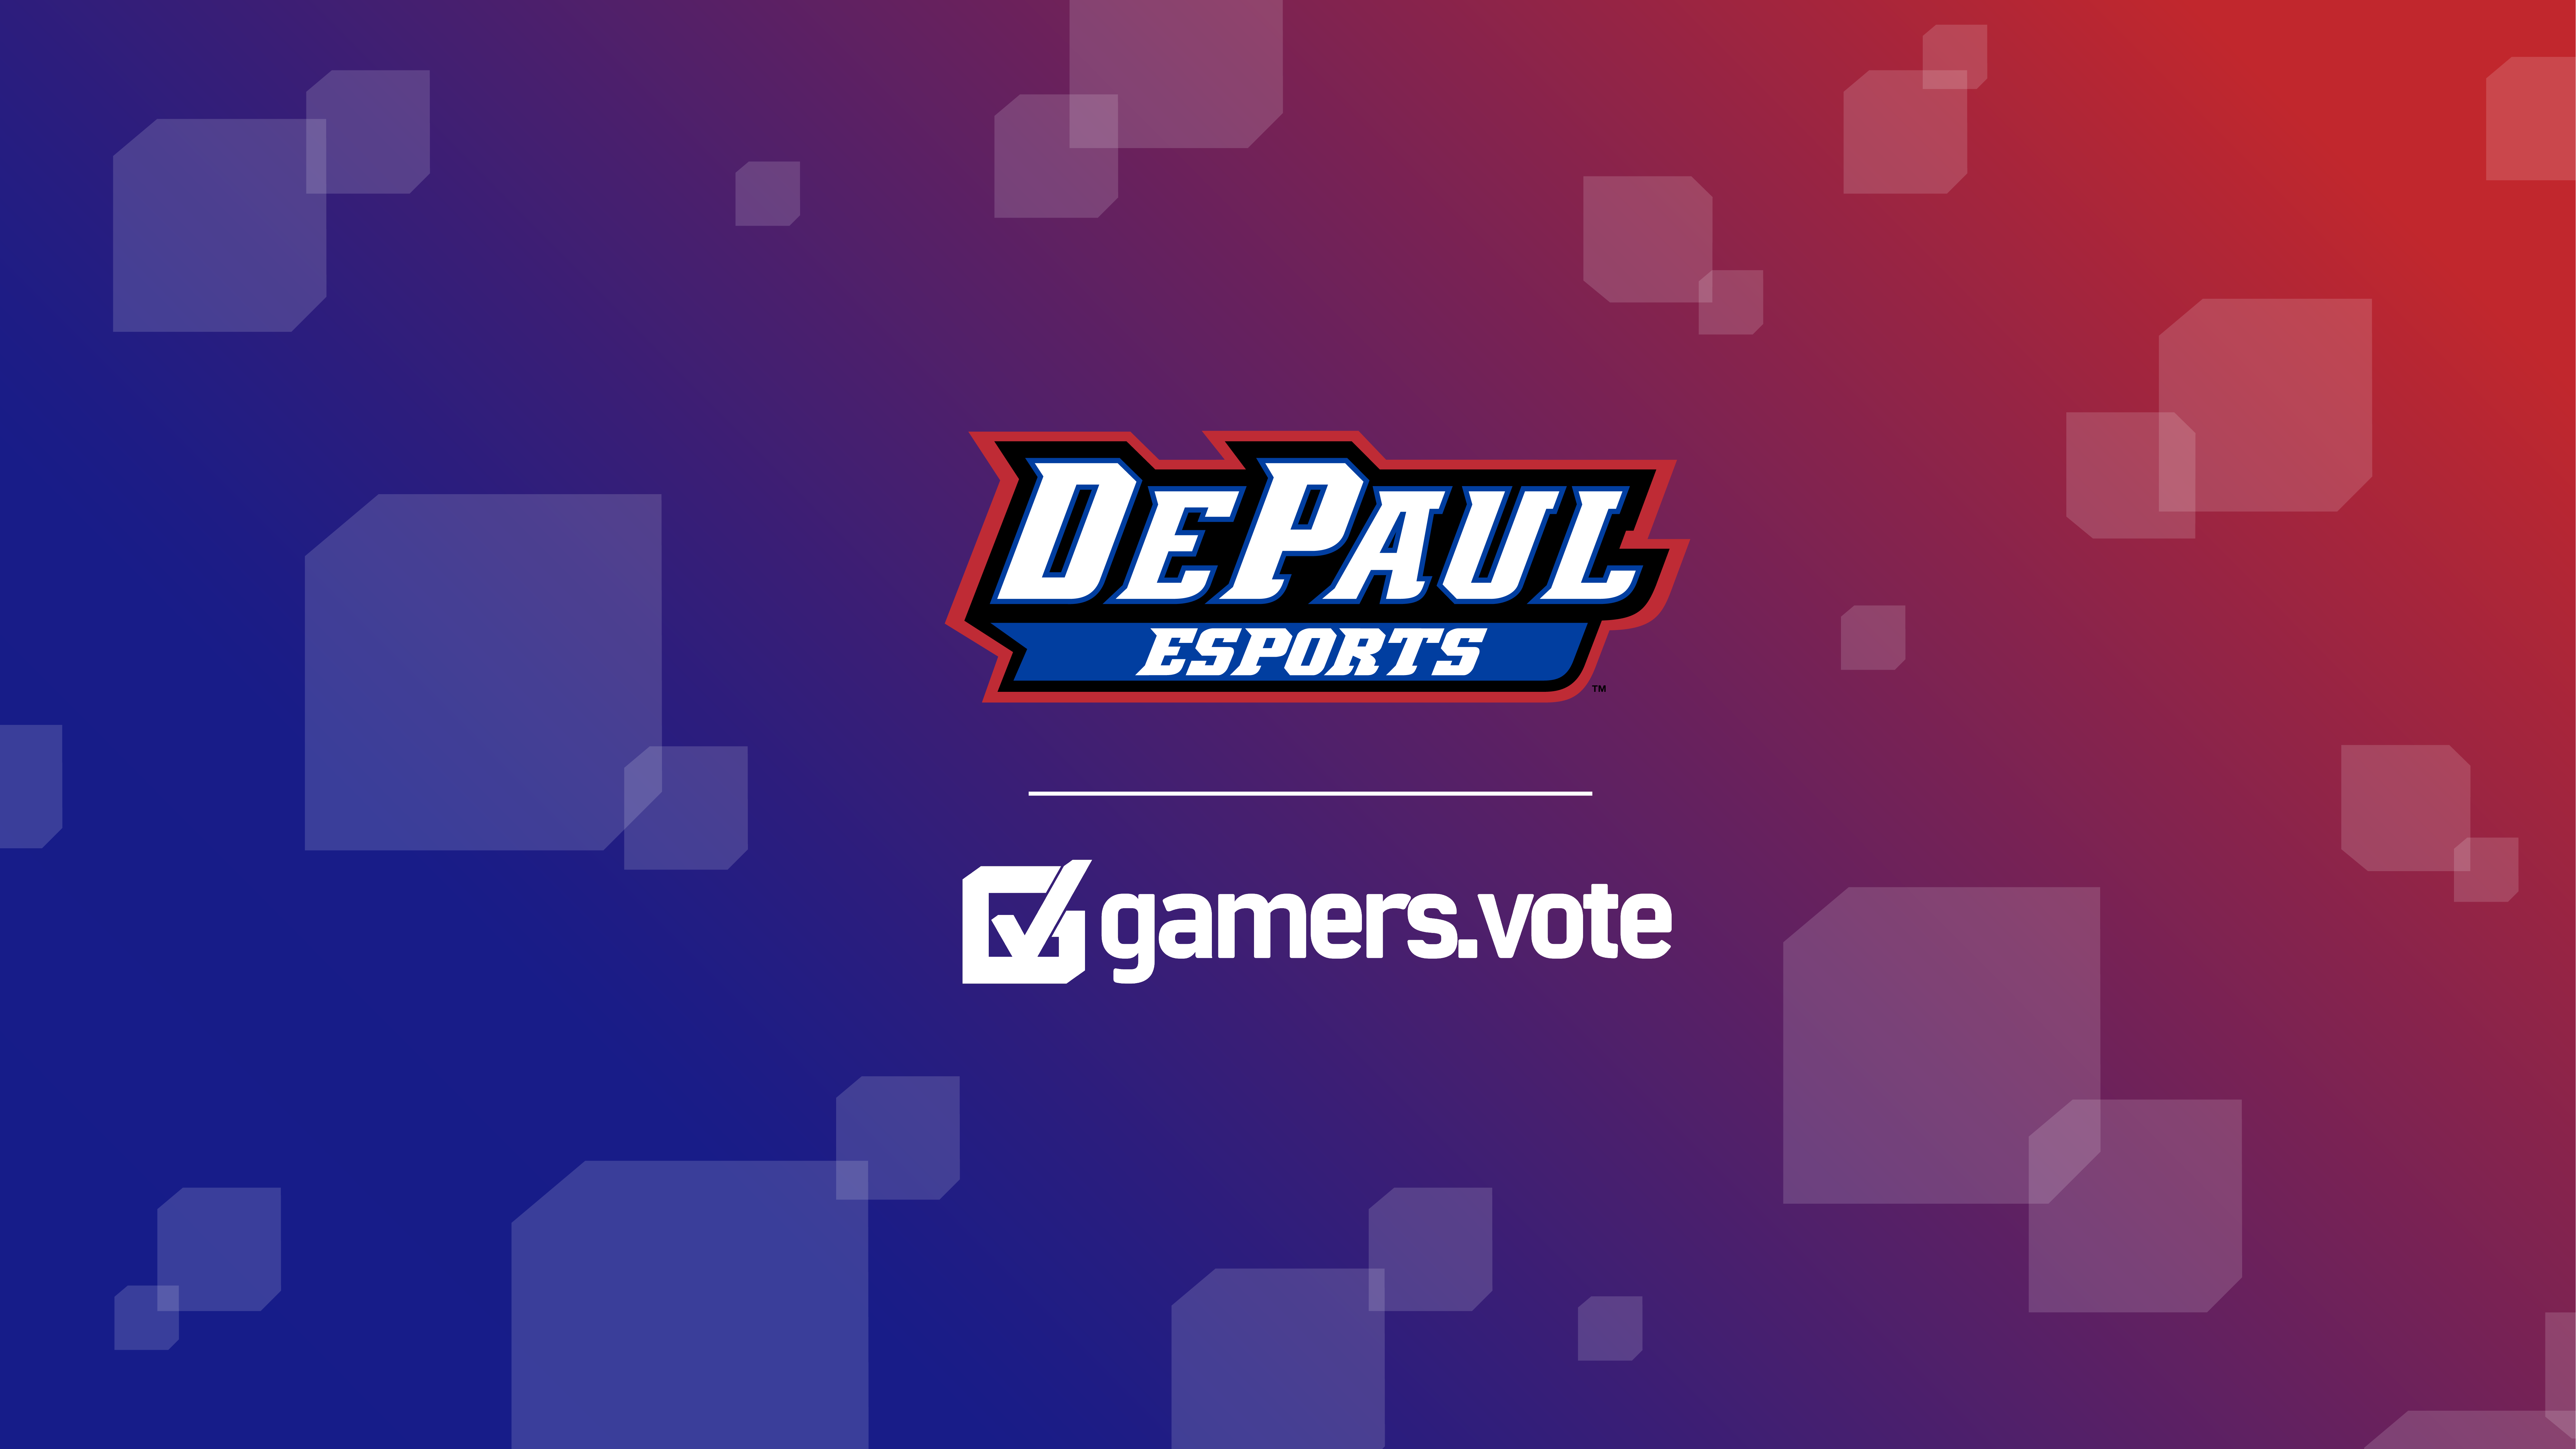 DePaul esports is partnering with Gamers.Vote